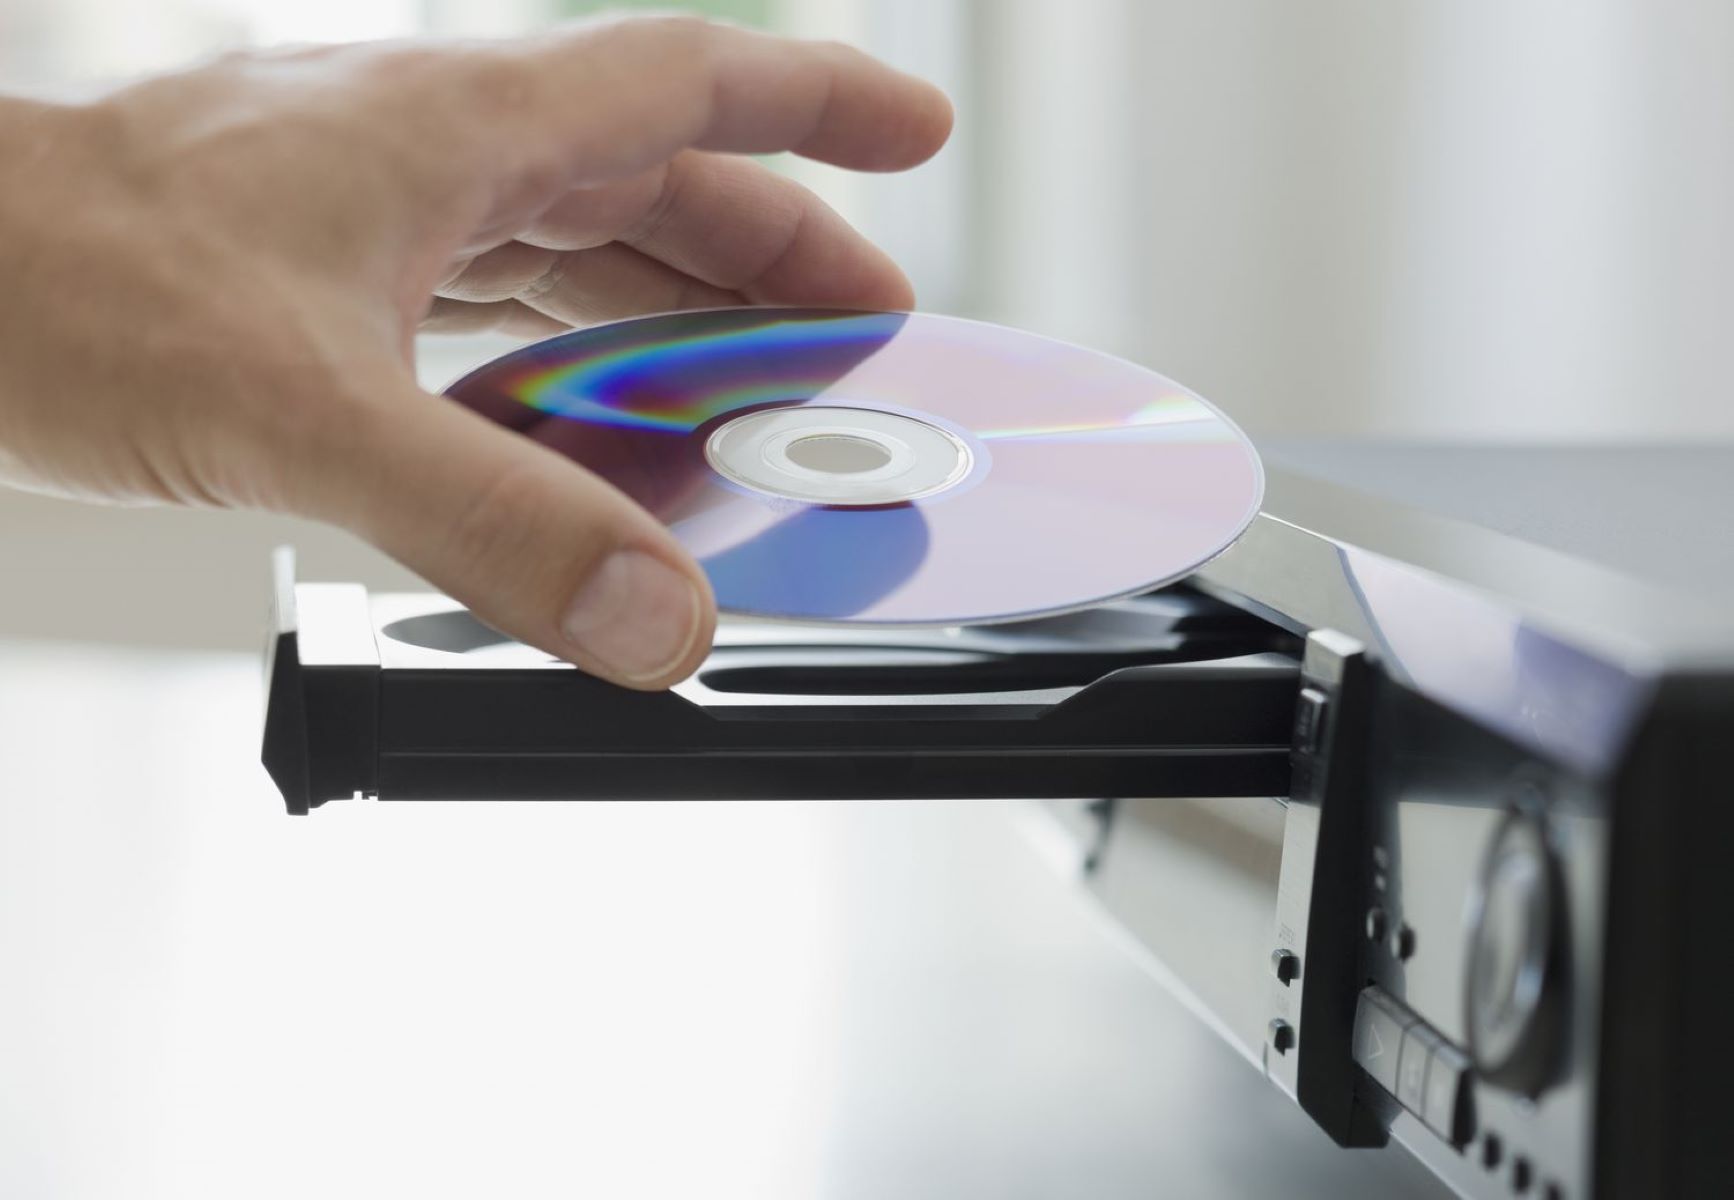 How To Burn An MP3 To A CD